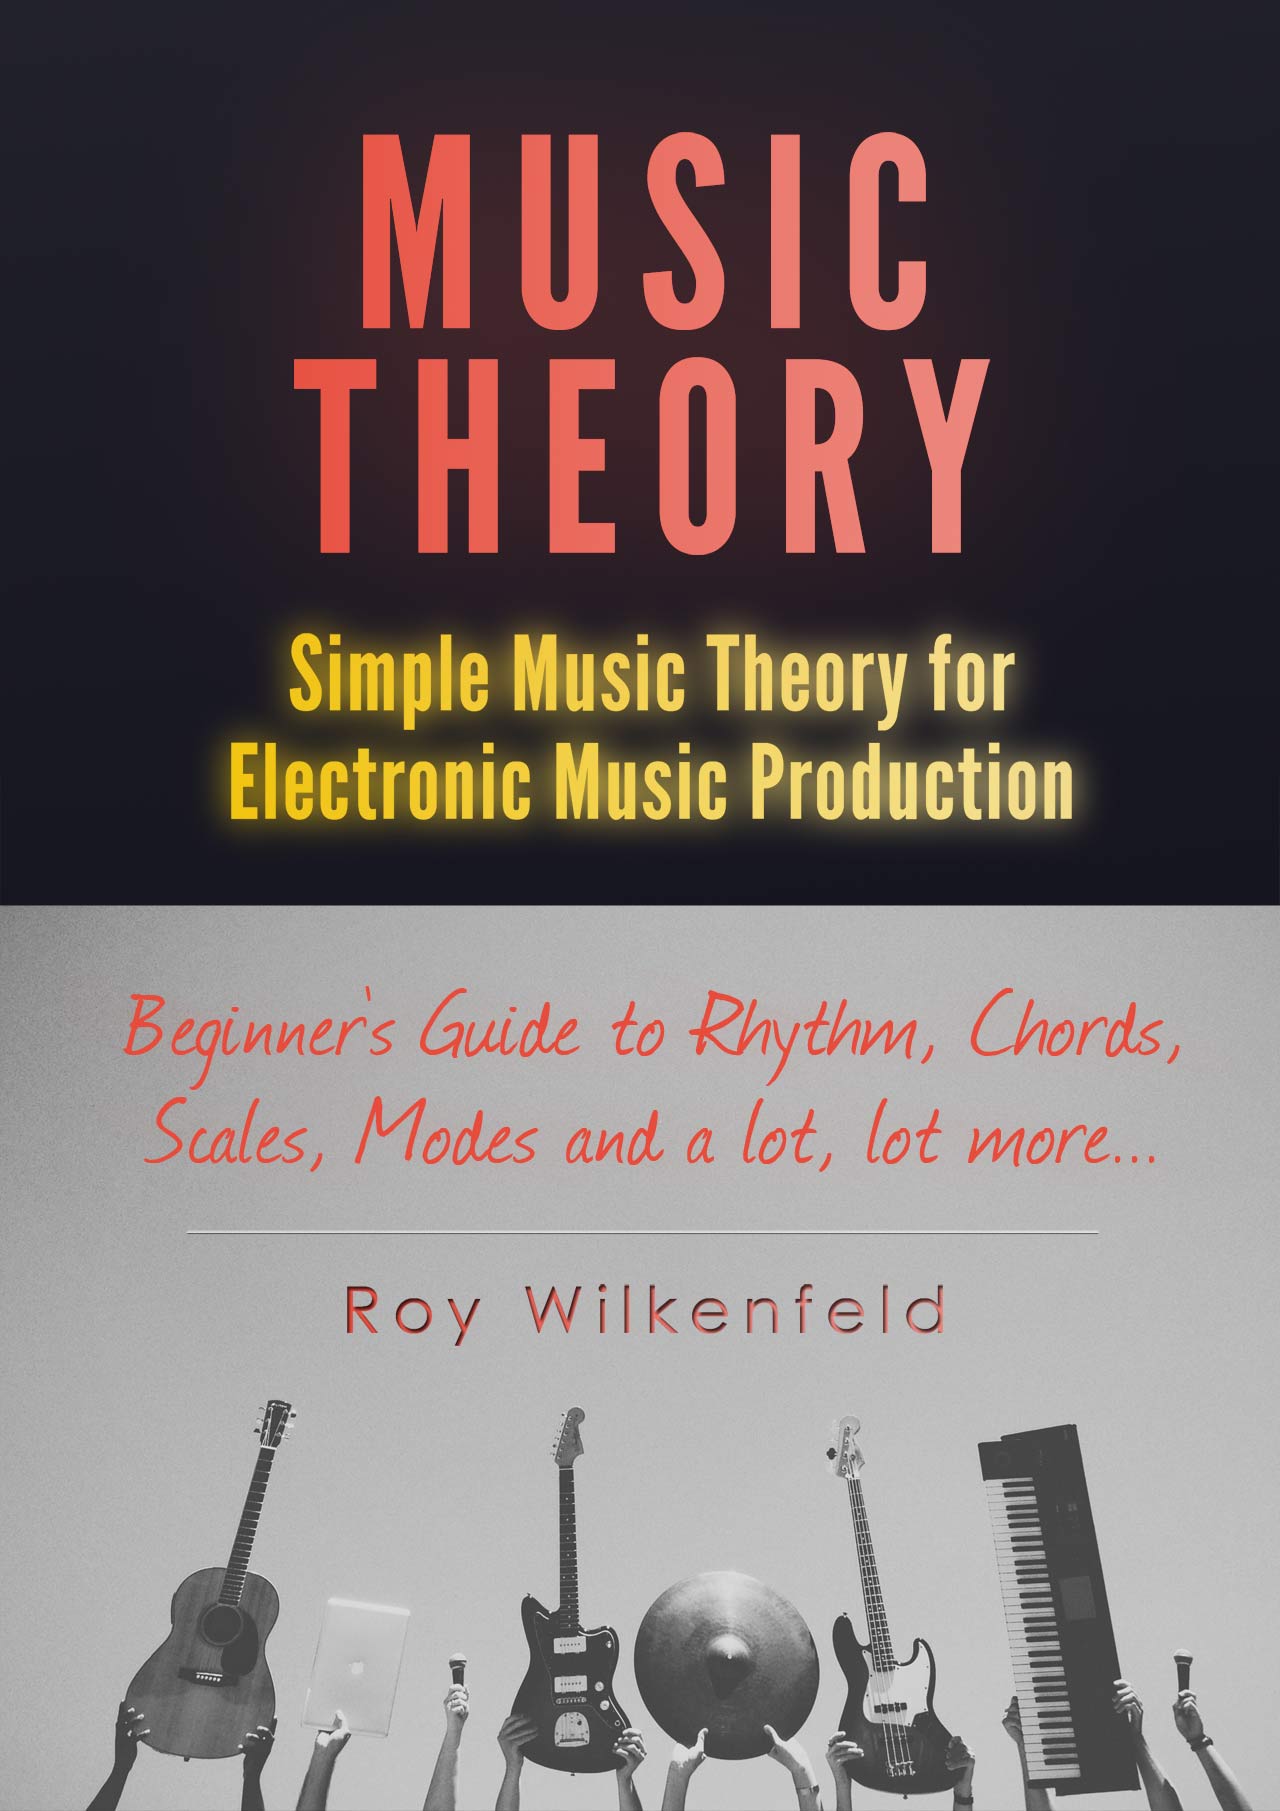 FREE: Music Theory: Simple Music Theory for Electronic Music Production: Beginners Guide to Rhythm, Chords, Scales, Modes and a lot, lot more… by Roy Wilkenfeld